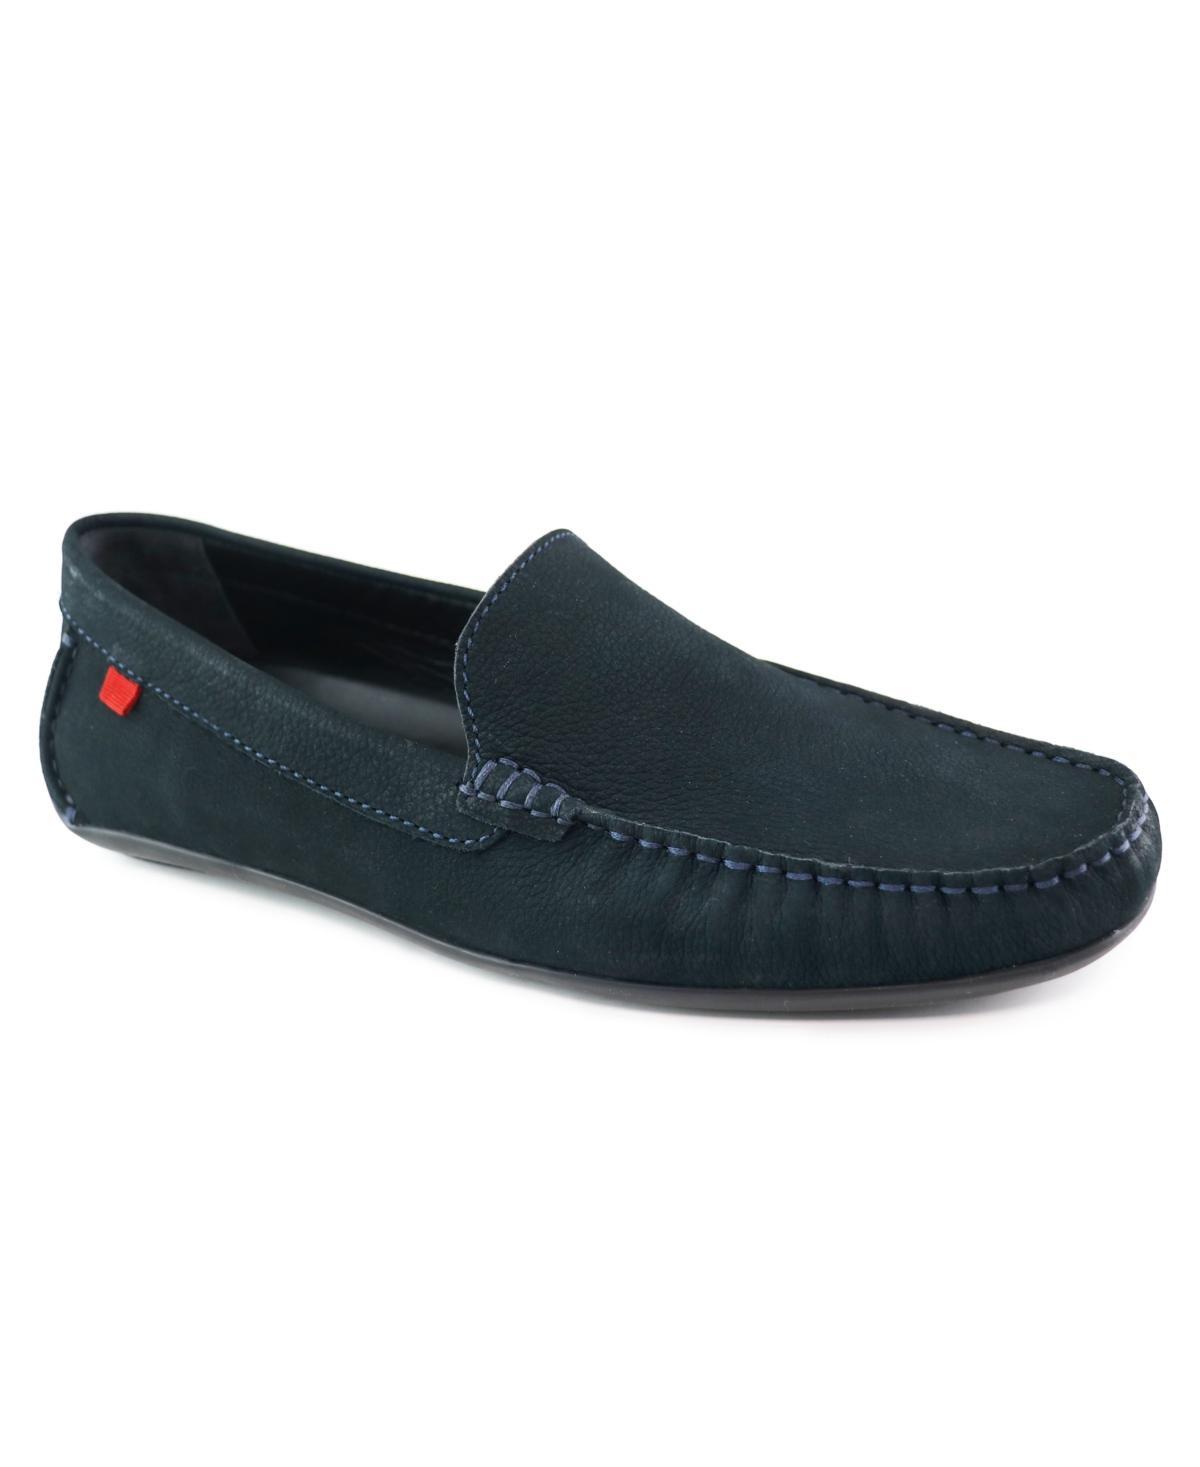 Marc Joseph New York Broadway Driving Loafer Product Image